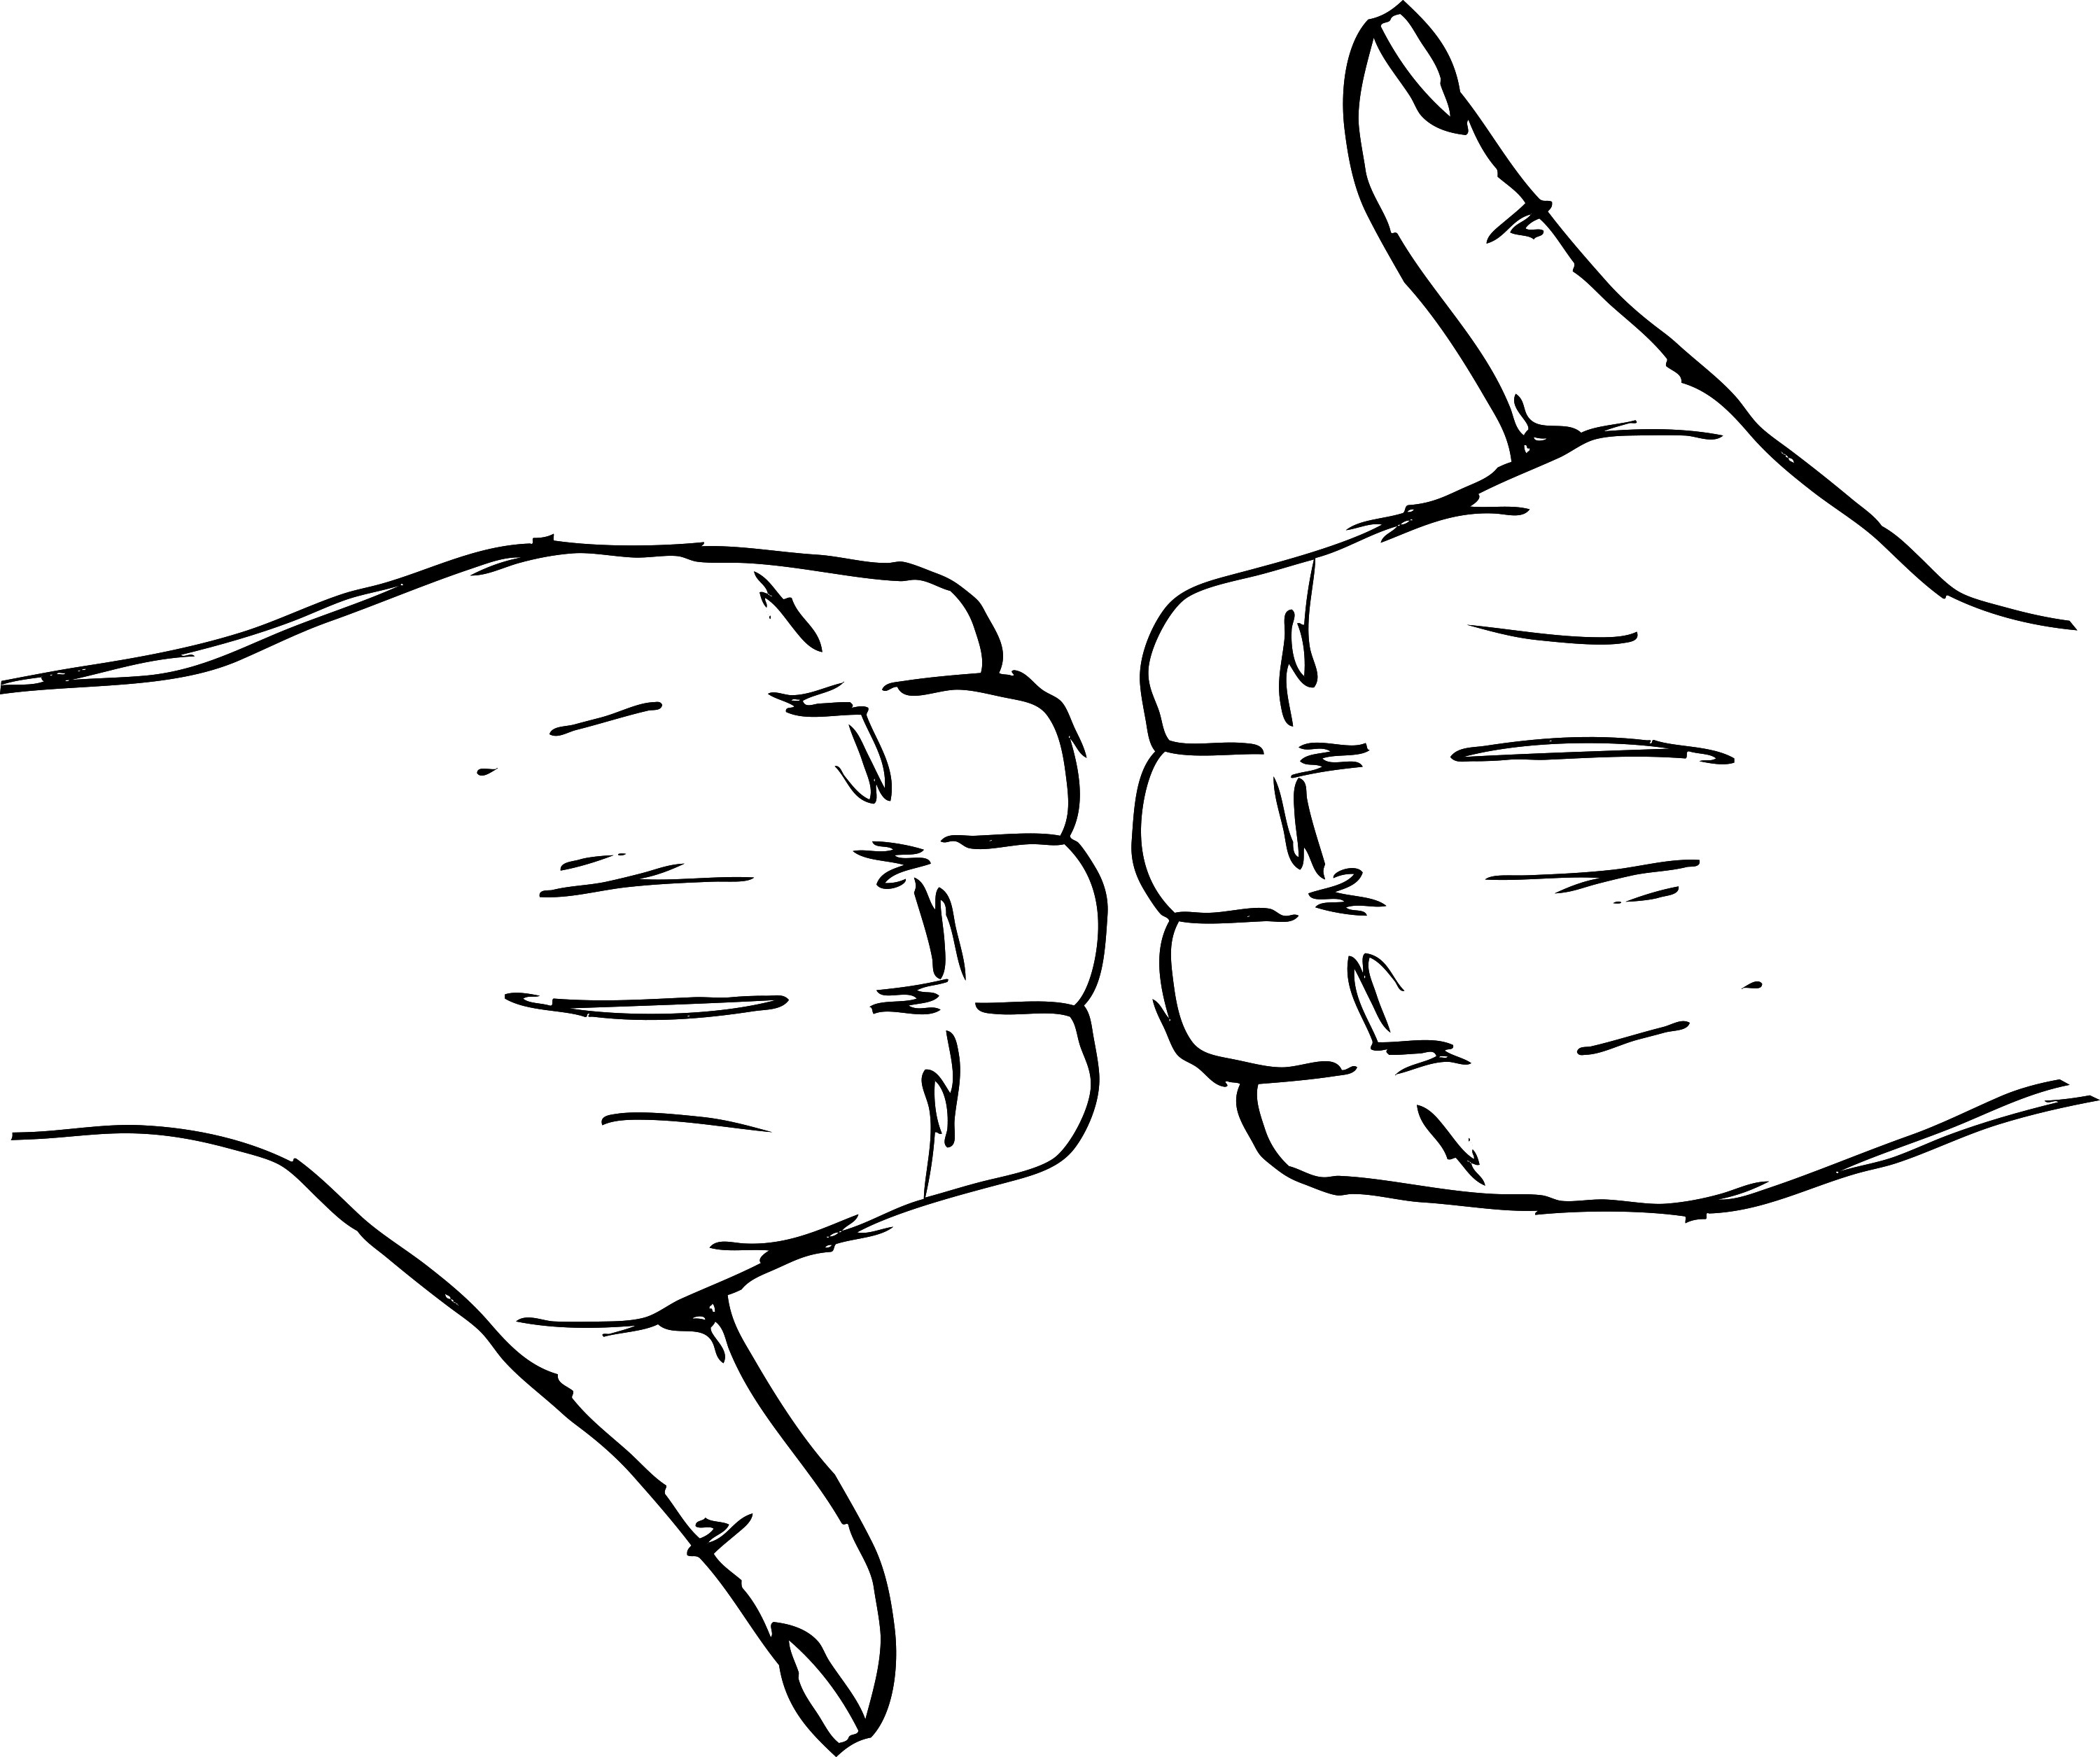 sketch-of-thumb-up-and-thumb-down-hand-signs-vector-illustration_M14lLfO__L.jpg